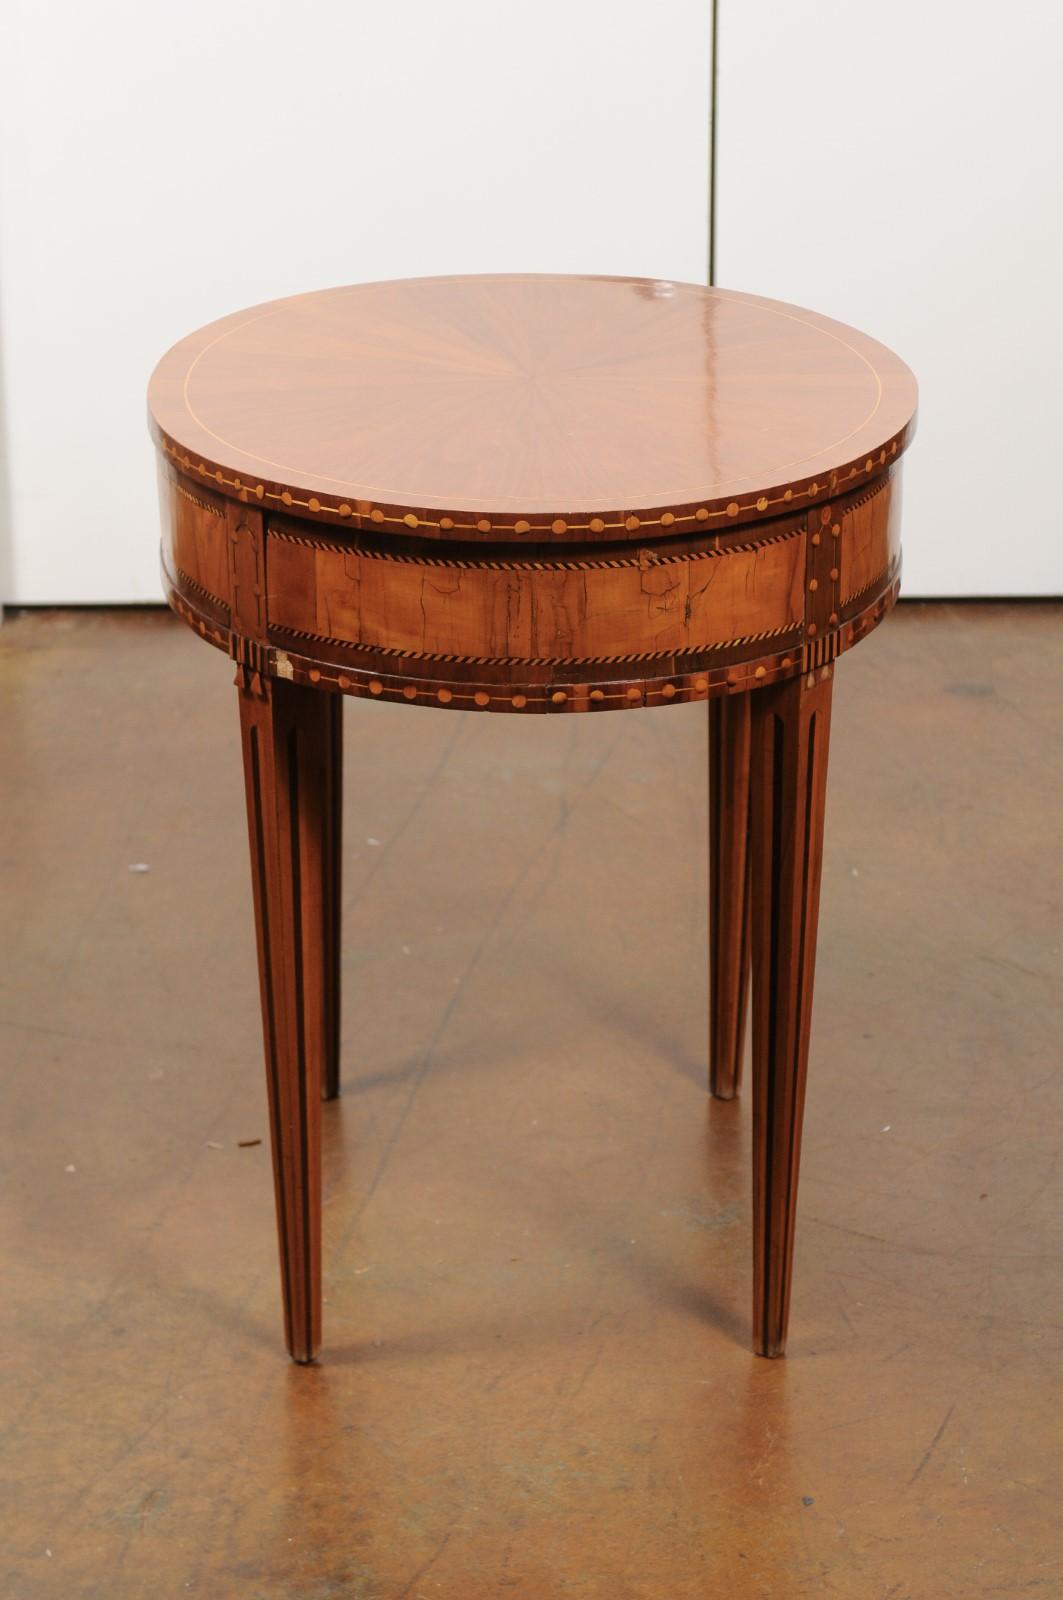 French 19th Century Oval Walnut and Satinwood Inlaid Table with Radiating Veneer 5